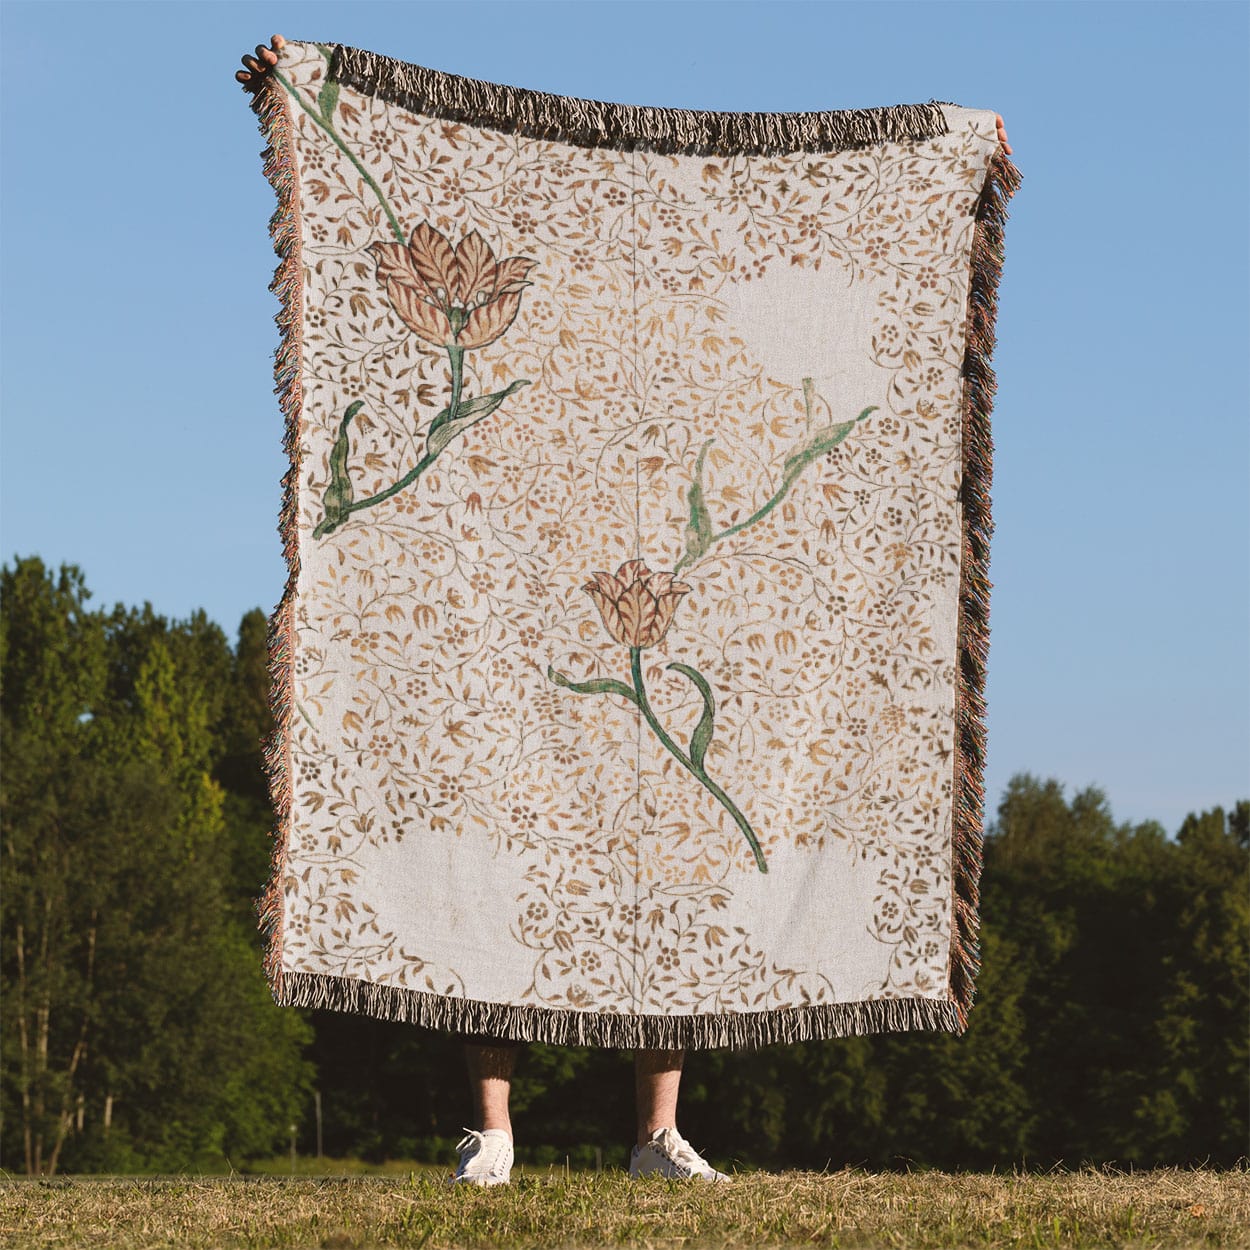 Aesthetic Floral Woven Blanket Held Up Outside